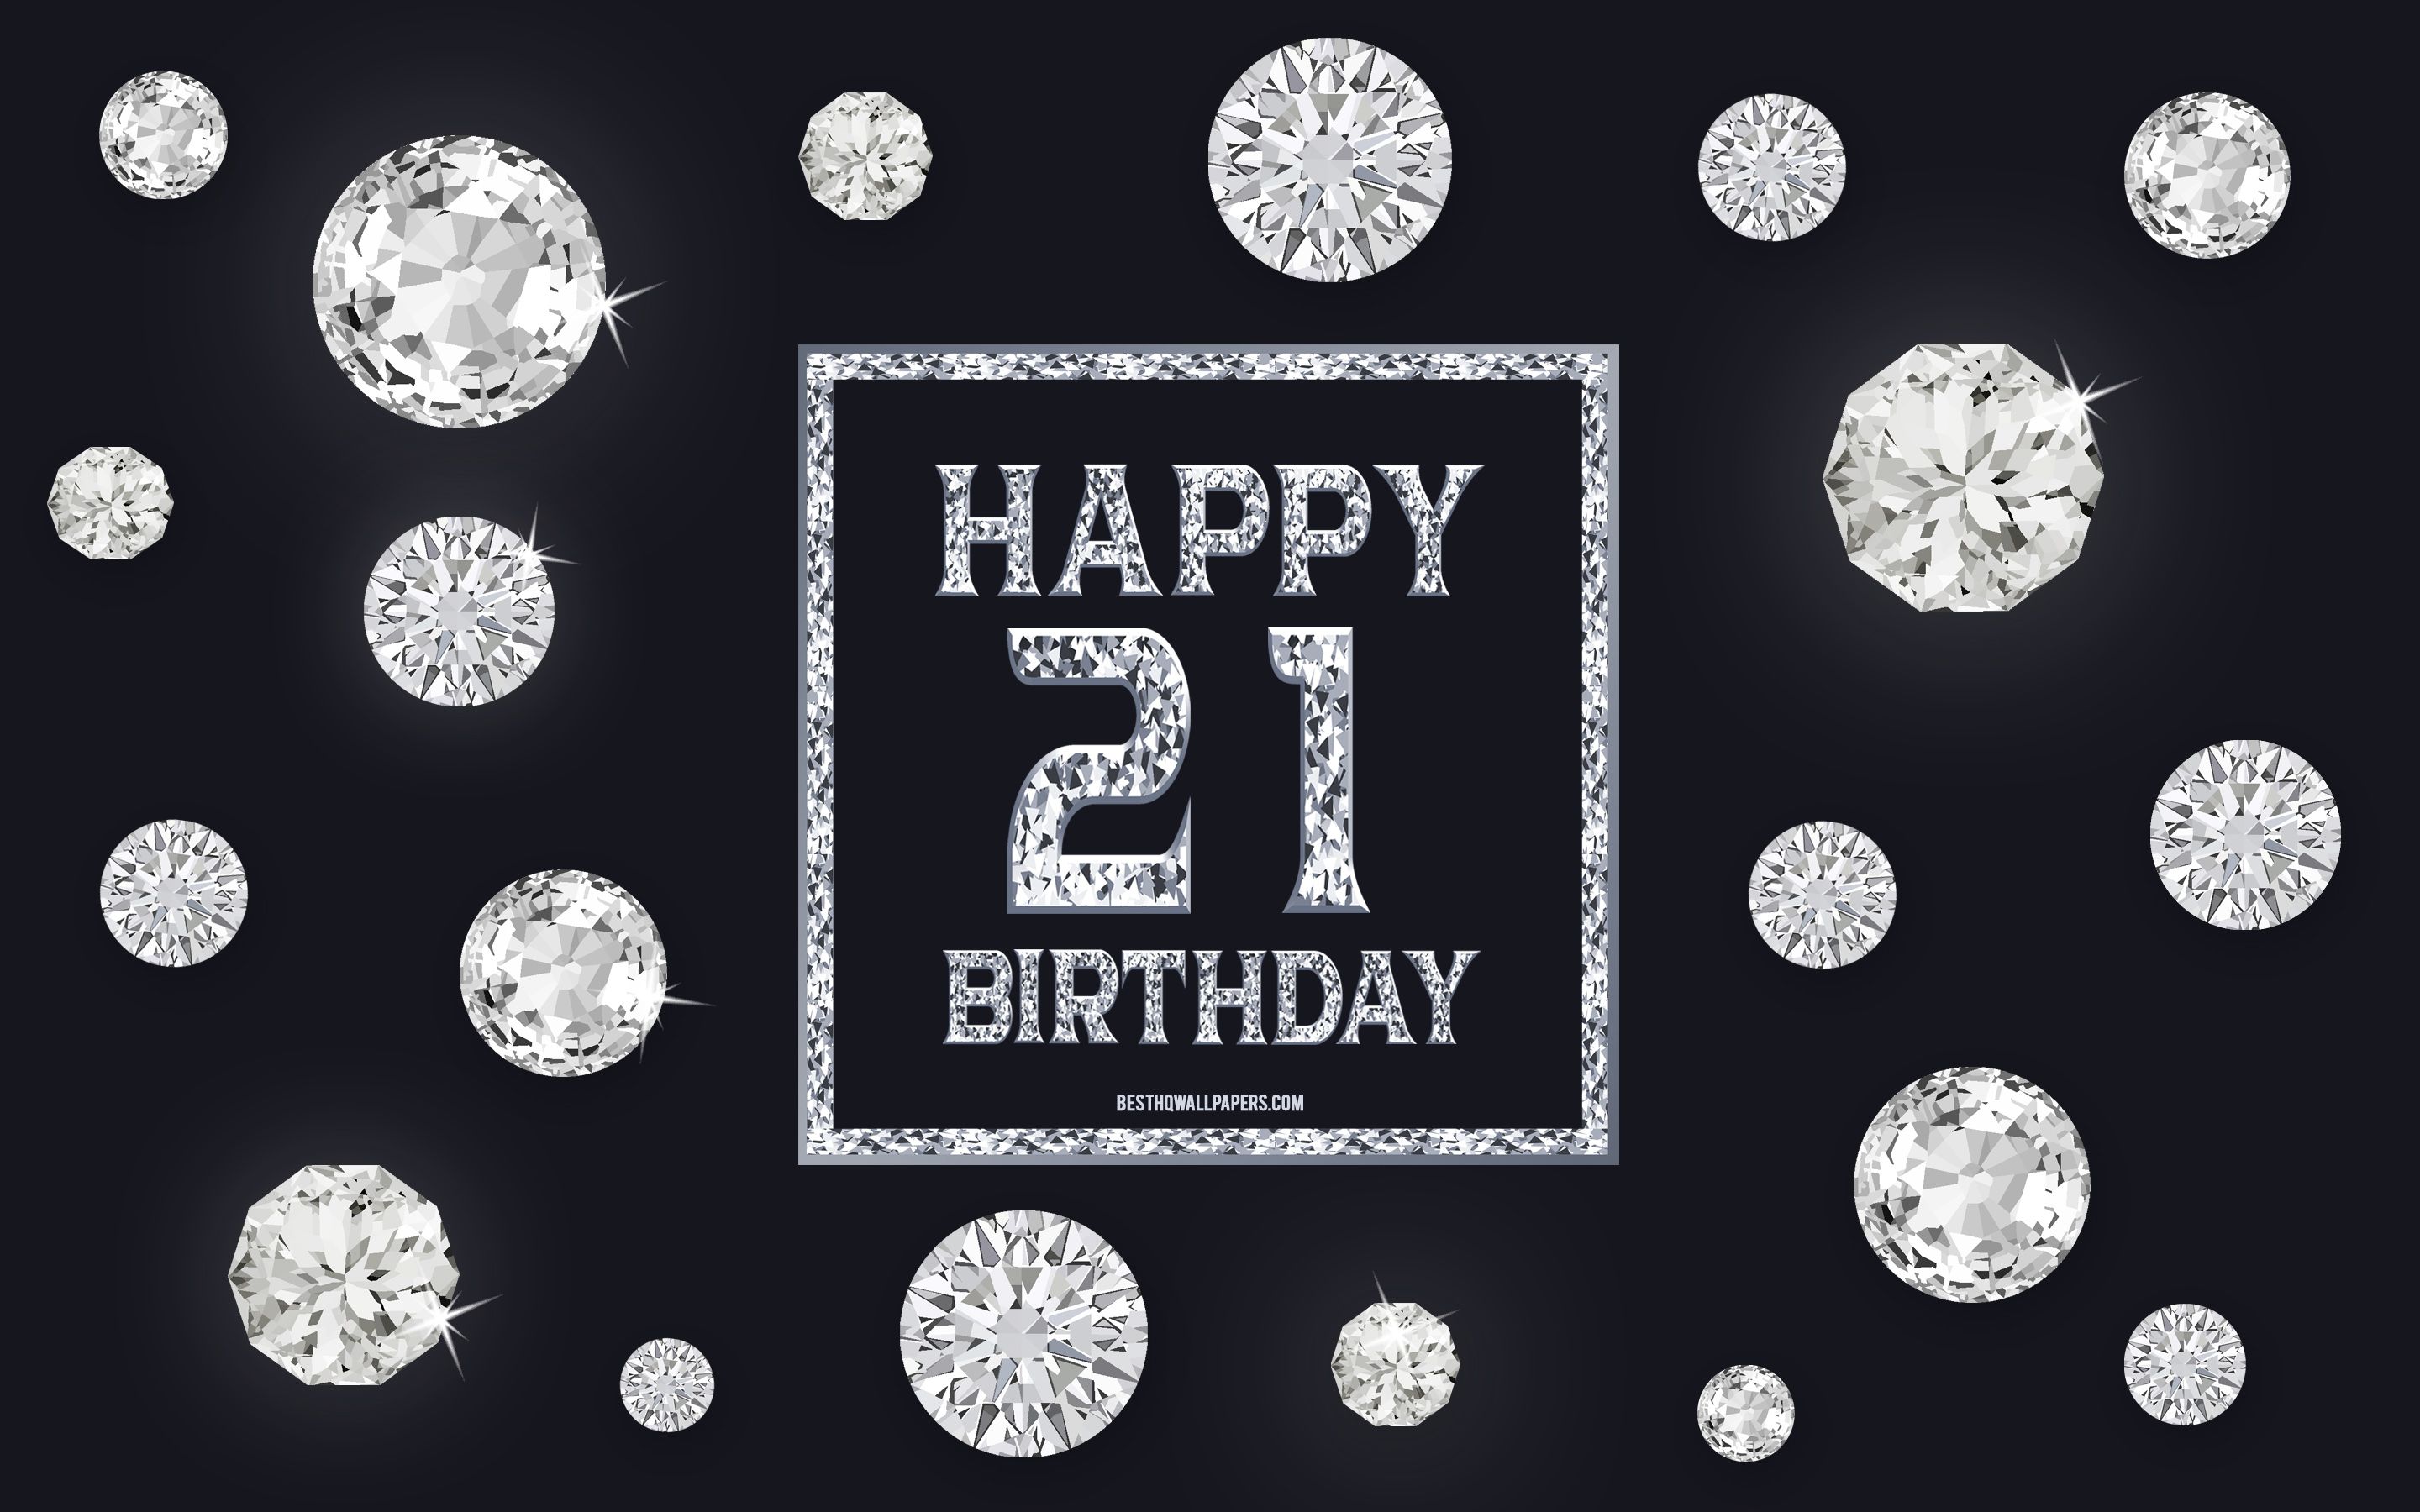 Download wallpaper 21st Happy Birthday, diamonds, gray background, Birthday background with gems, 21 Years Birthday, Happy 21st Birthday, creative art, Happy Birthday background for desktop with resolution 2880x1800. High Quality HD picture